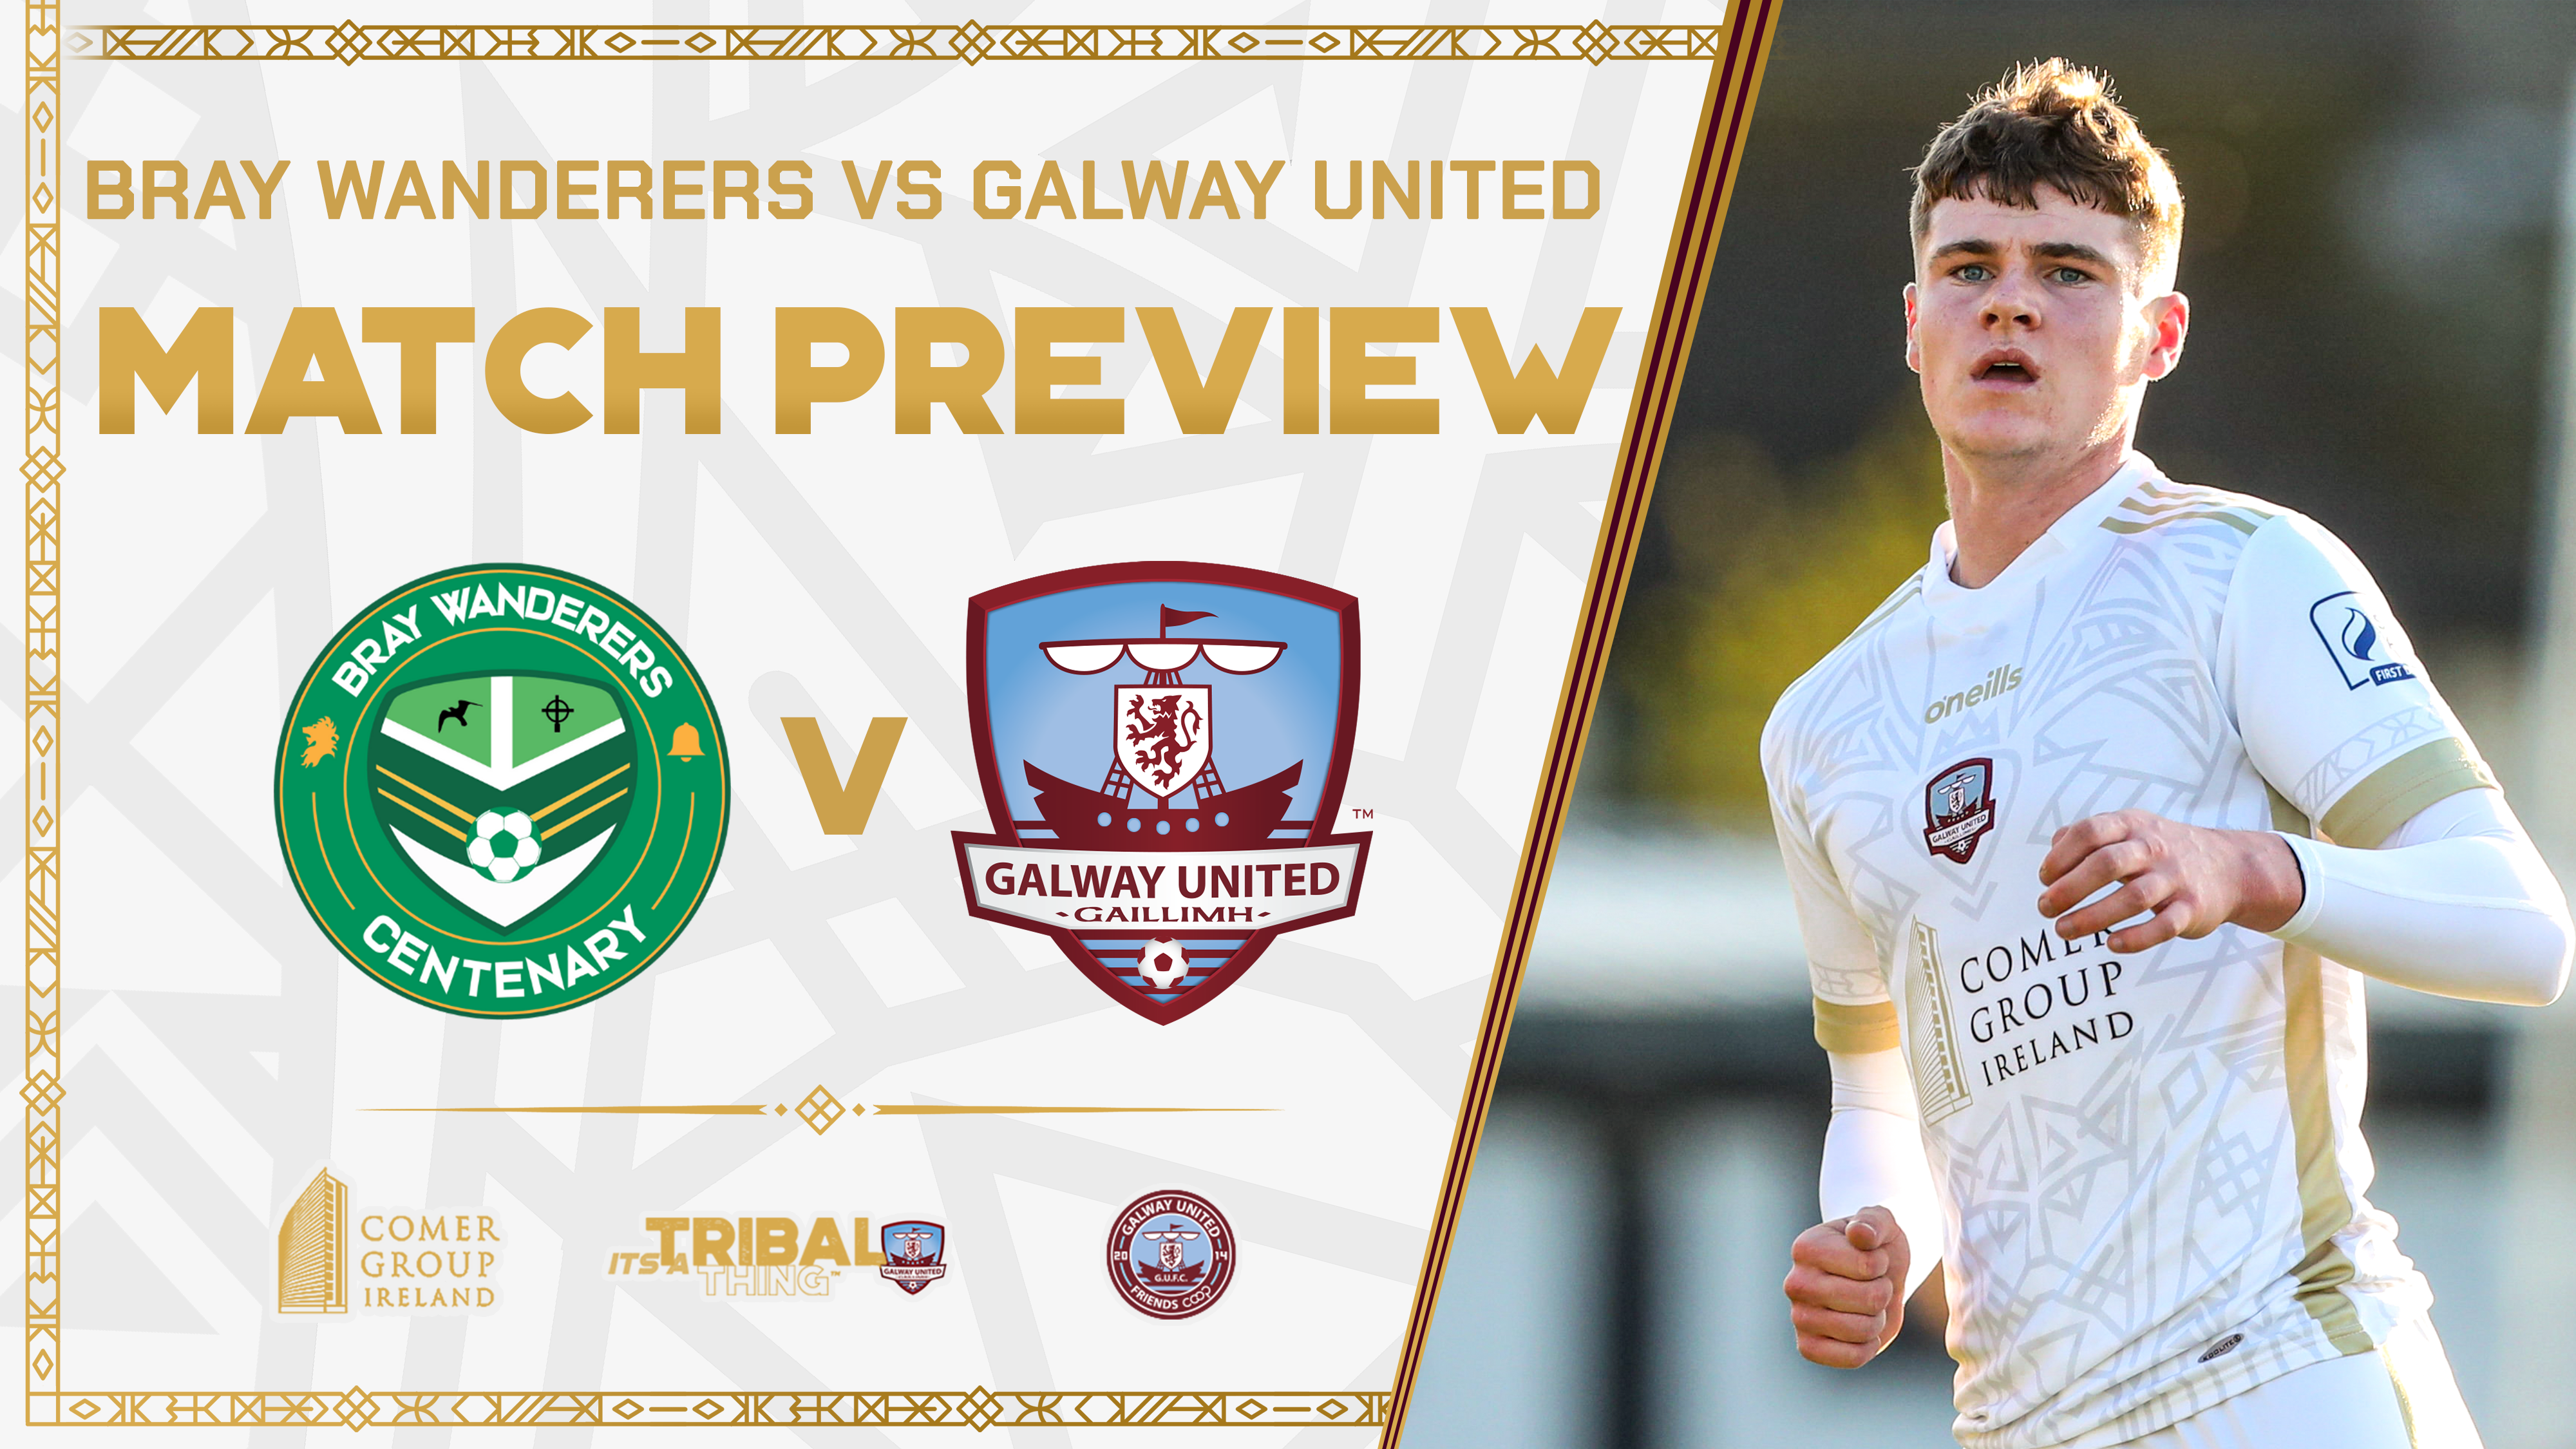 Match Preview: Bray Wanderers vs Galway United